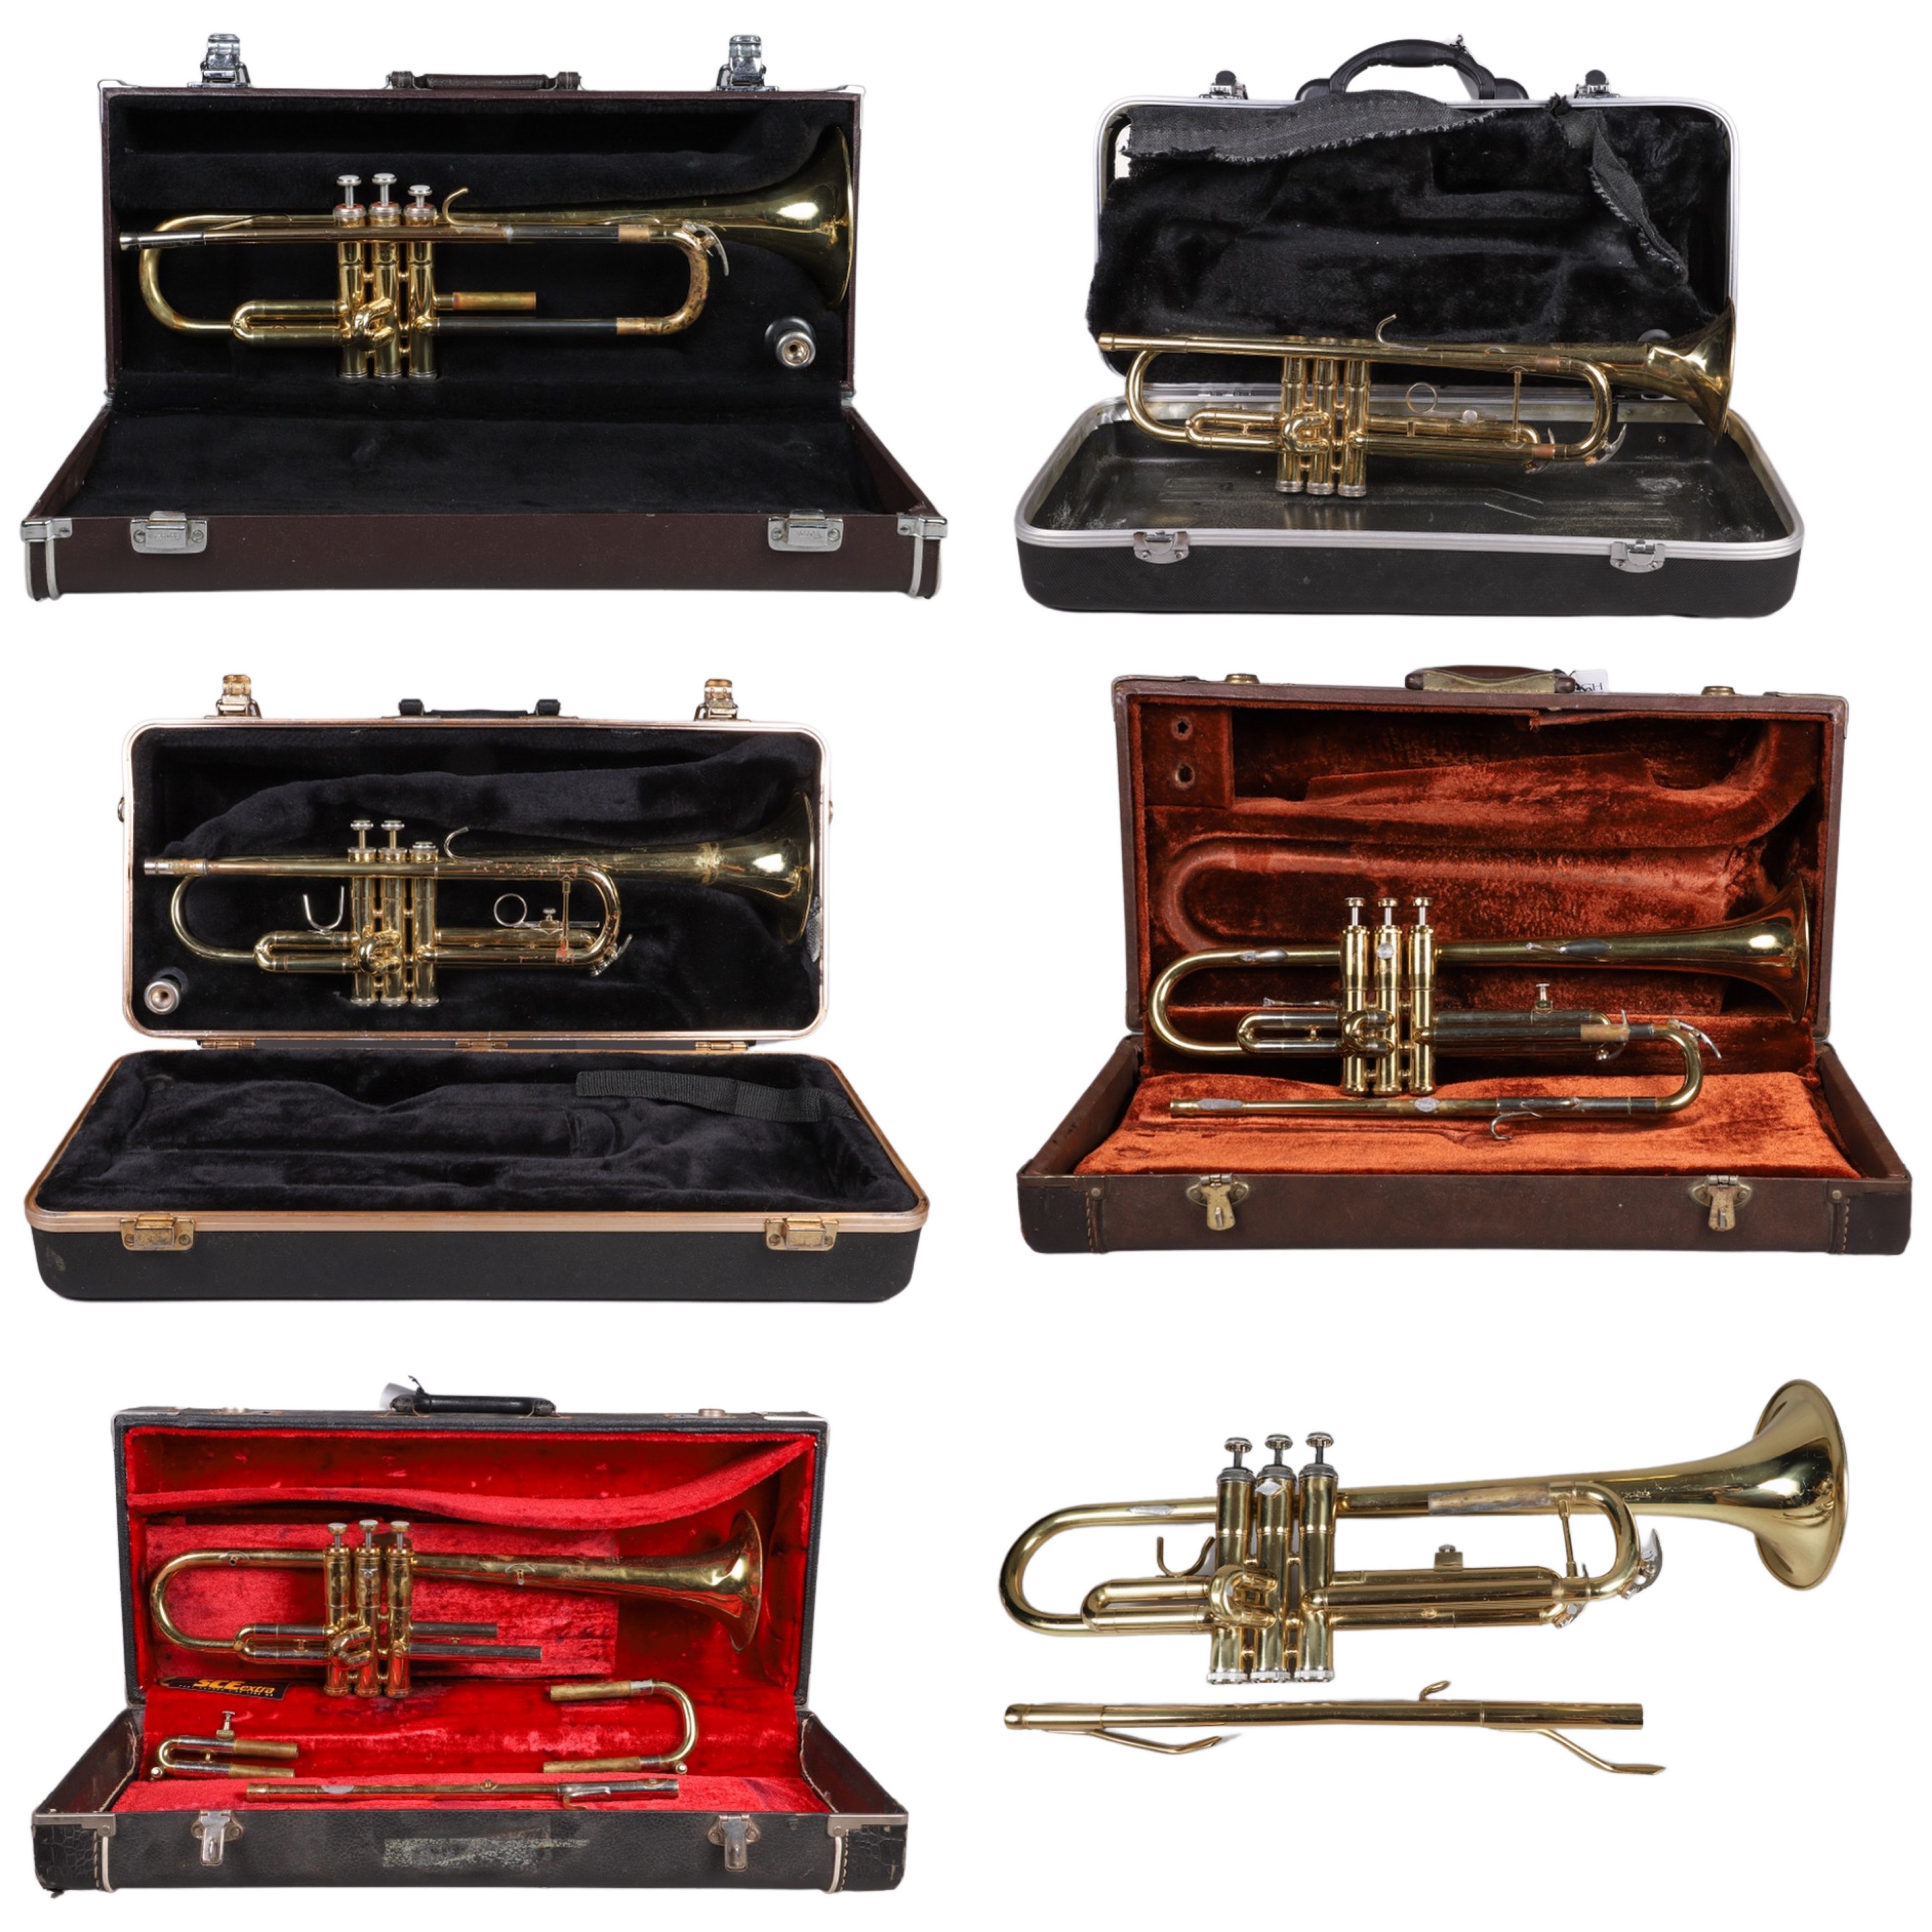  6 Trumpets all with condition 3b5bbe